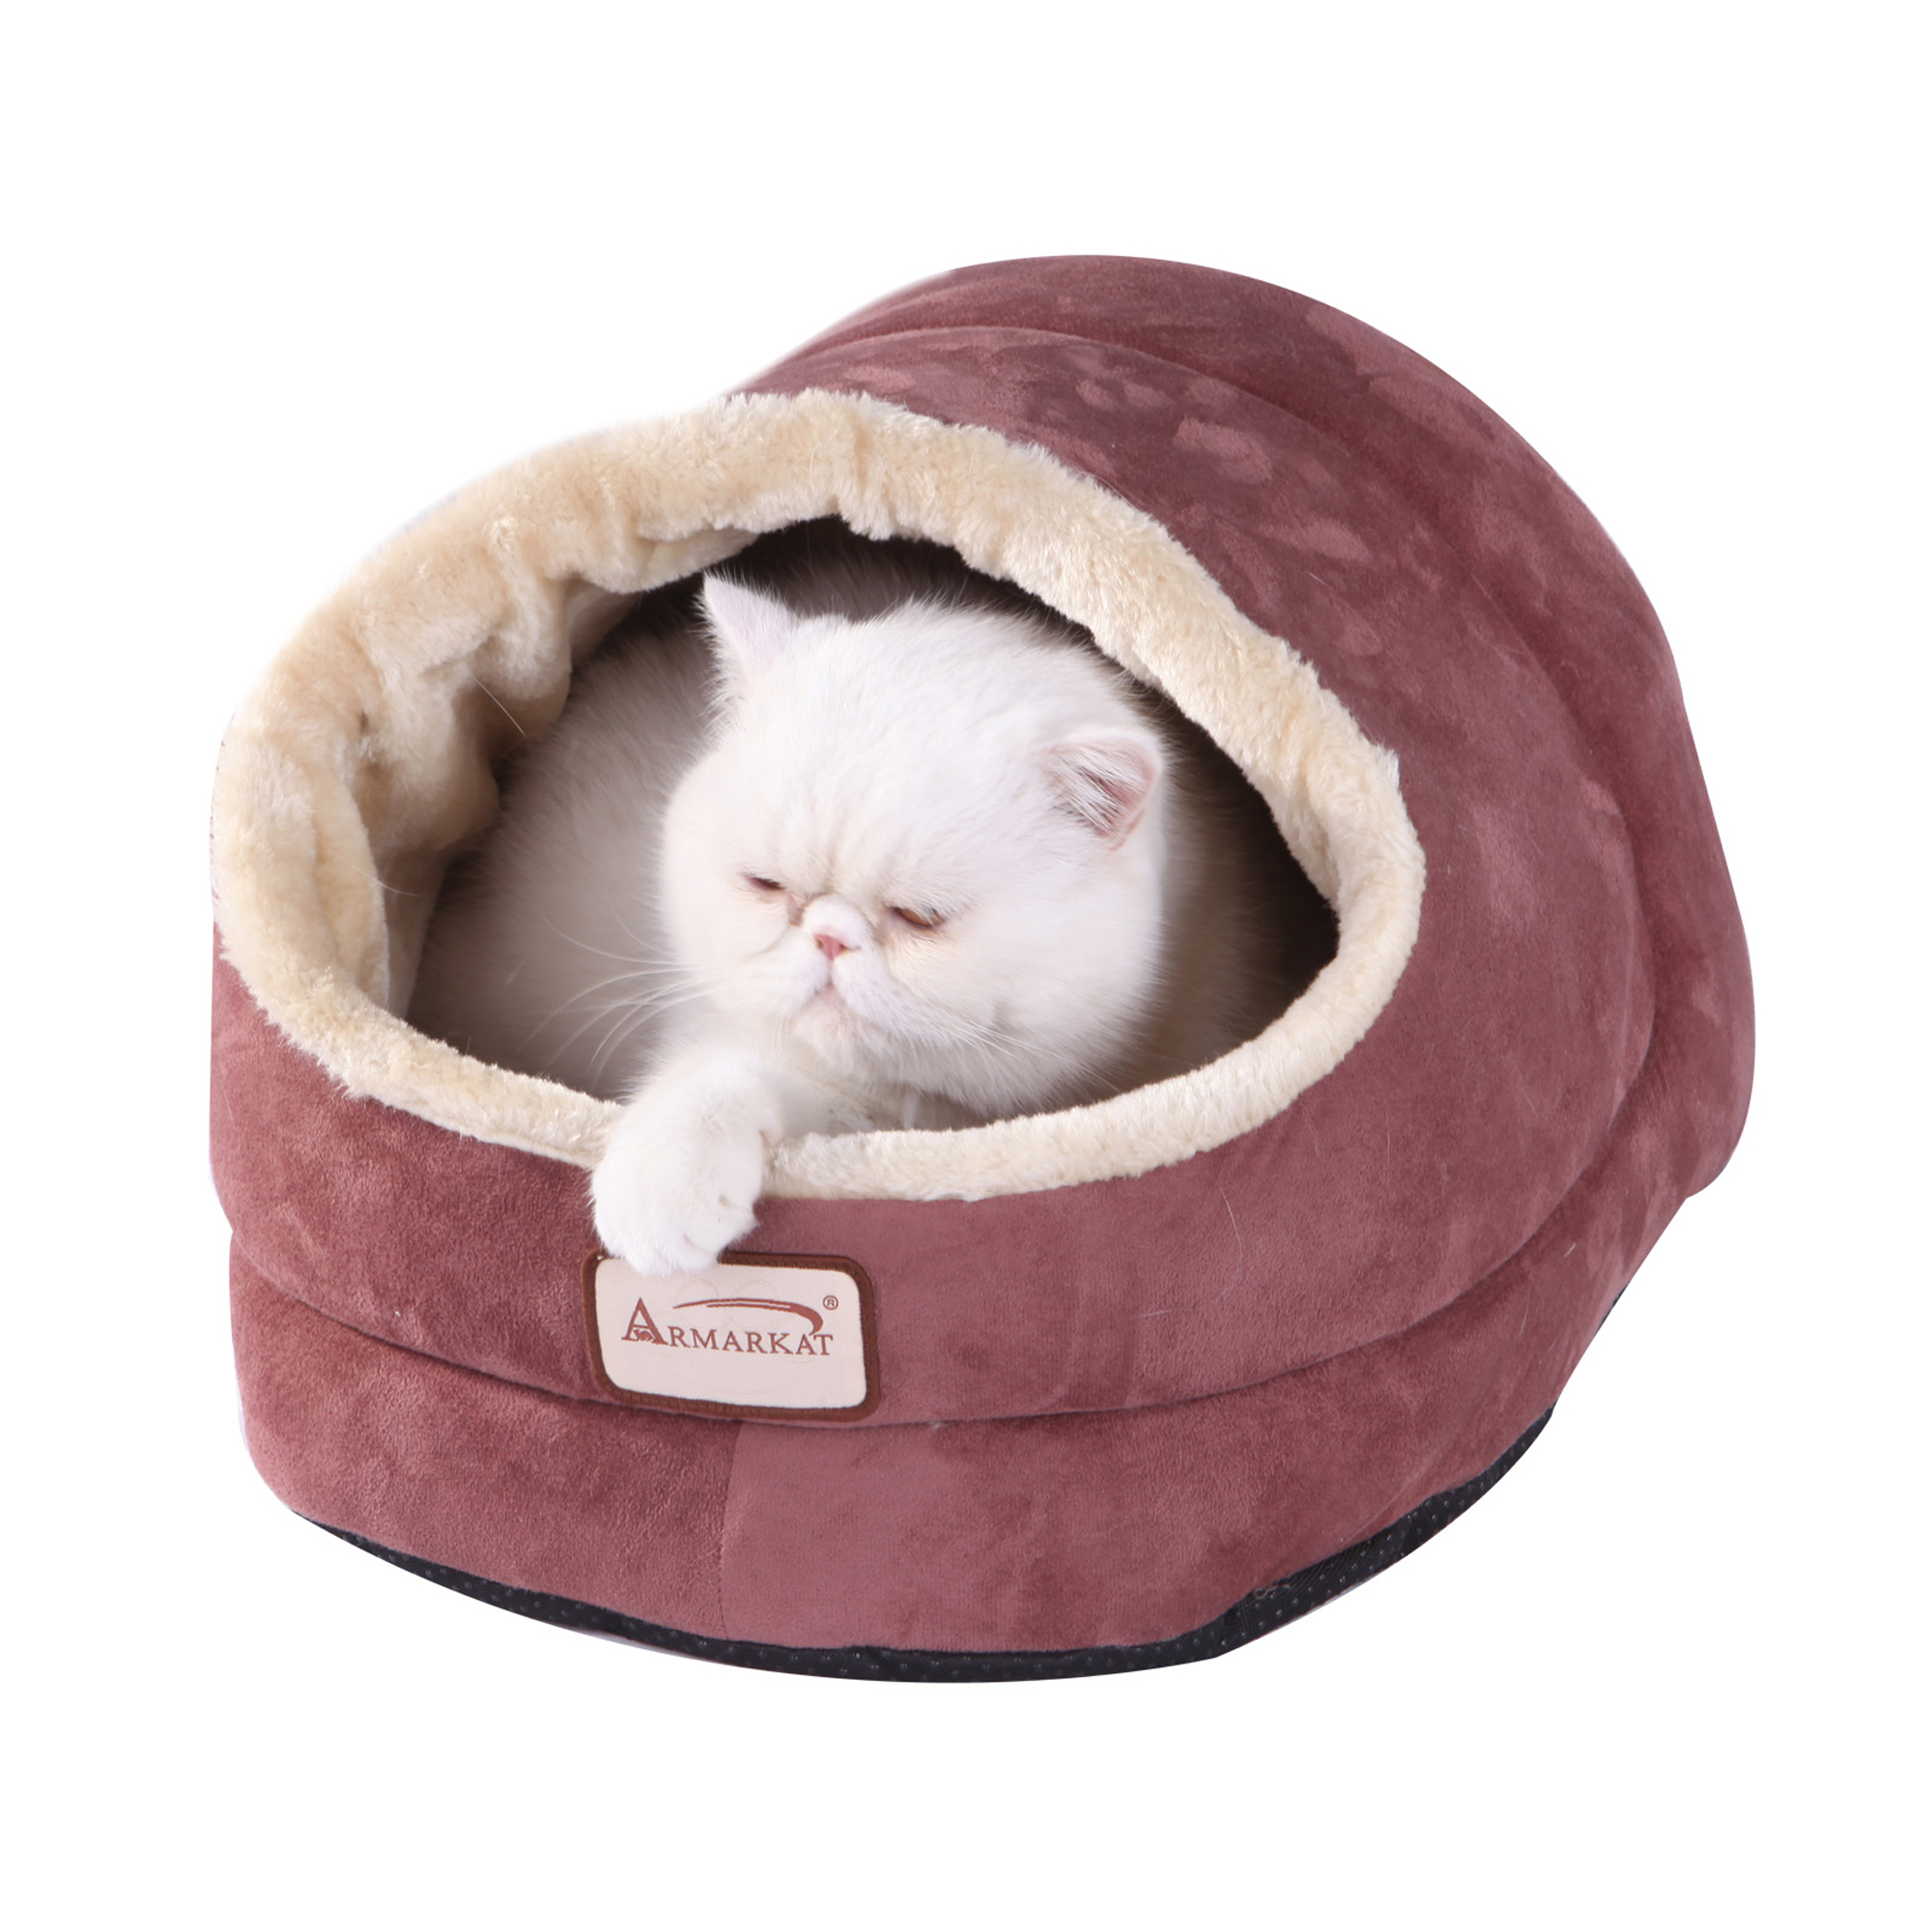 C18hth-mh Armarkat Pet Bed Cat Bed 18 X 12 X 14 - Indian Red & Beige